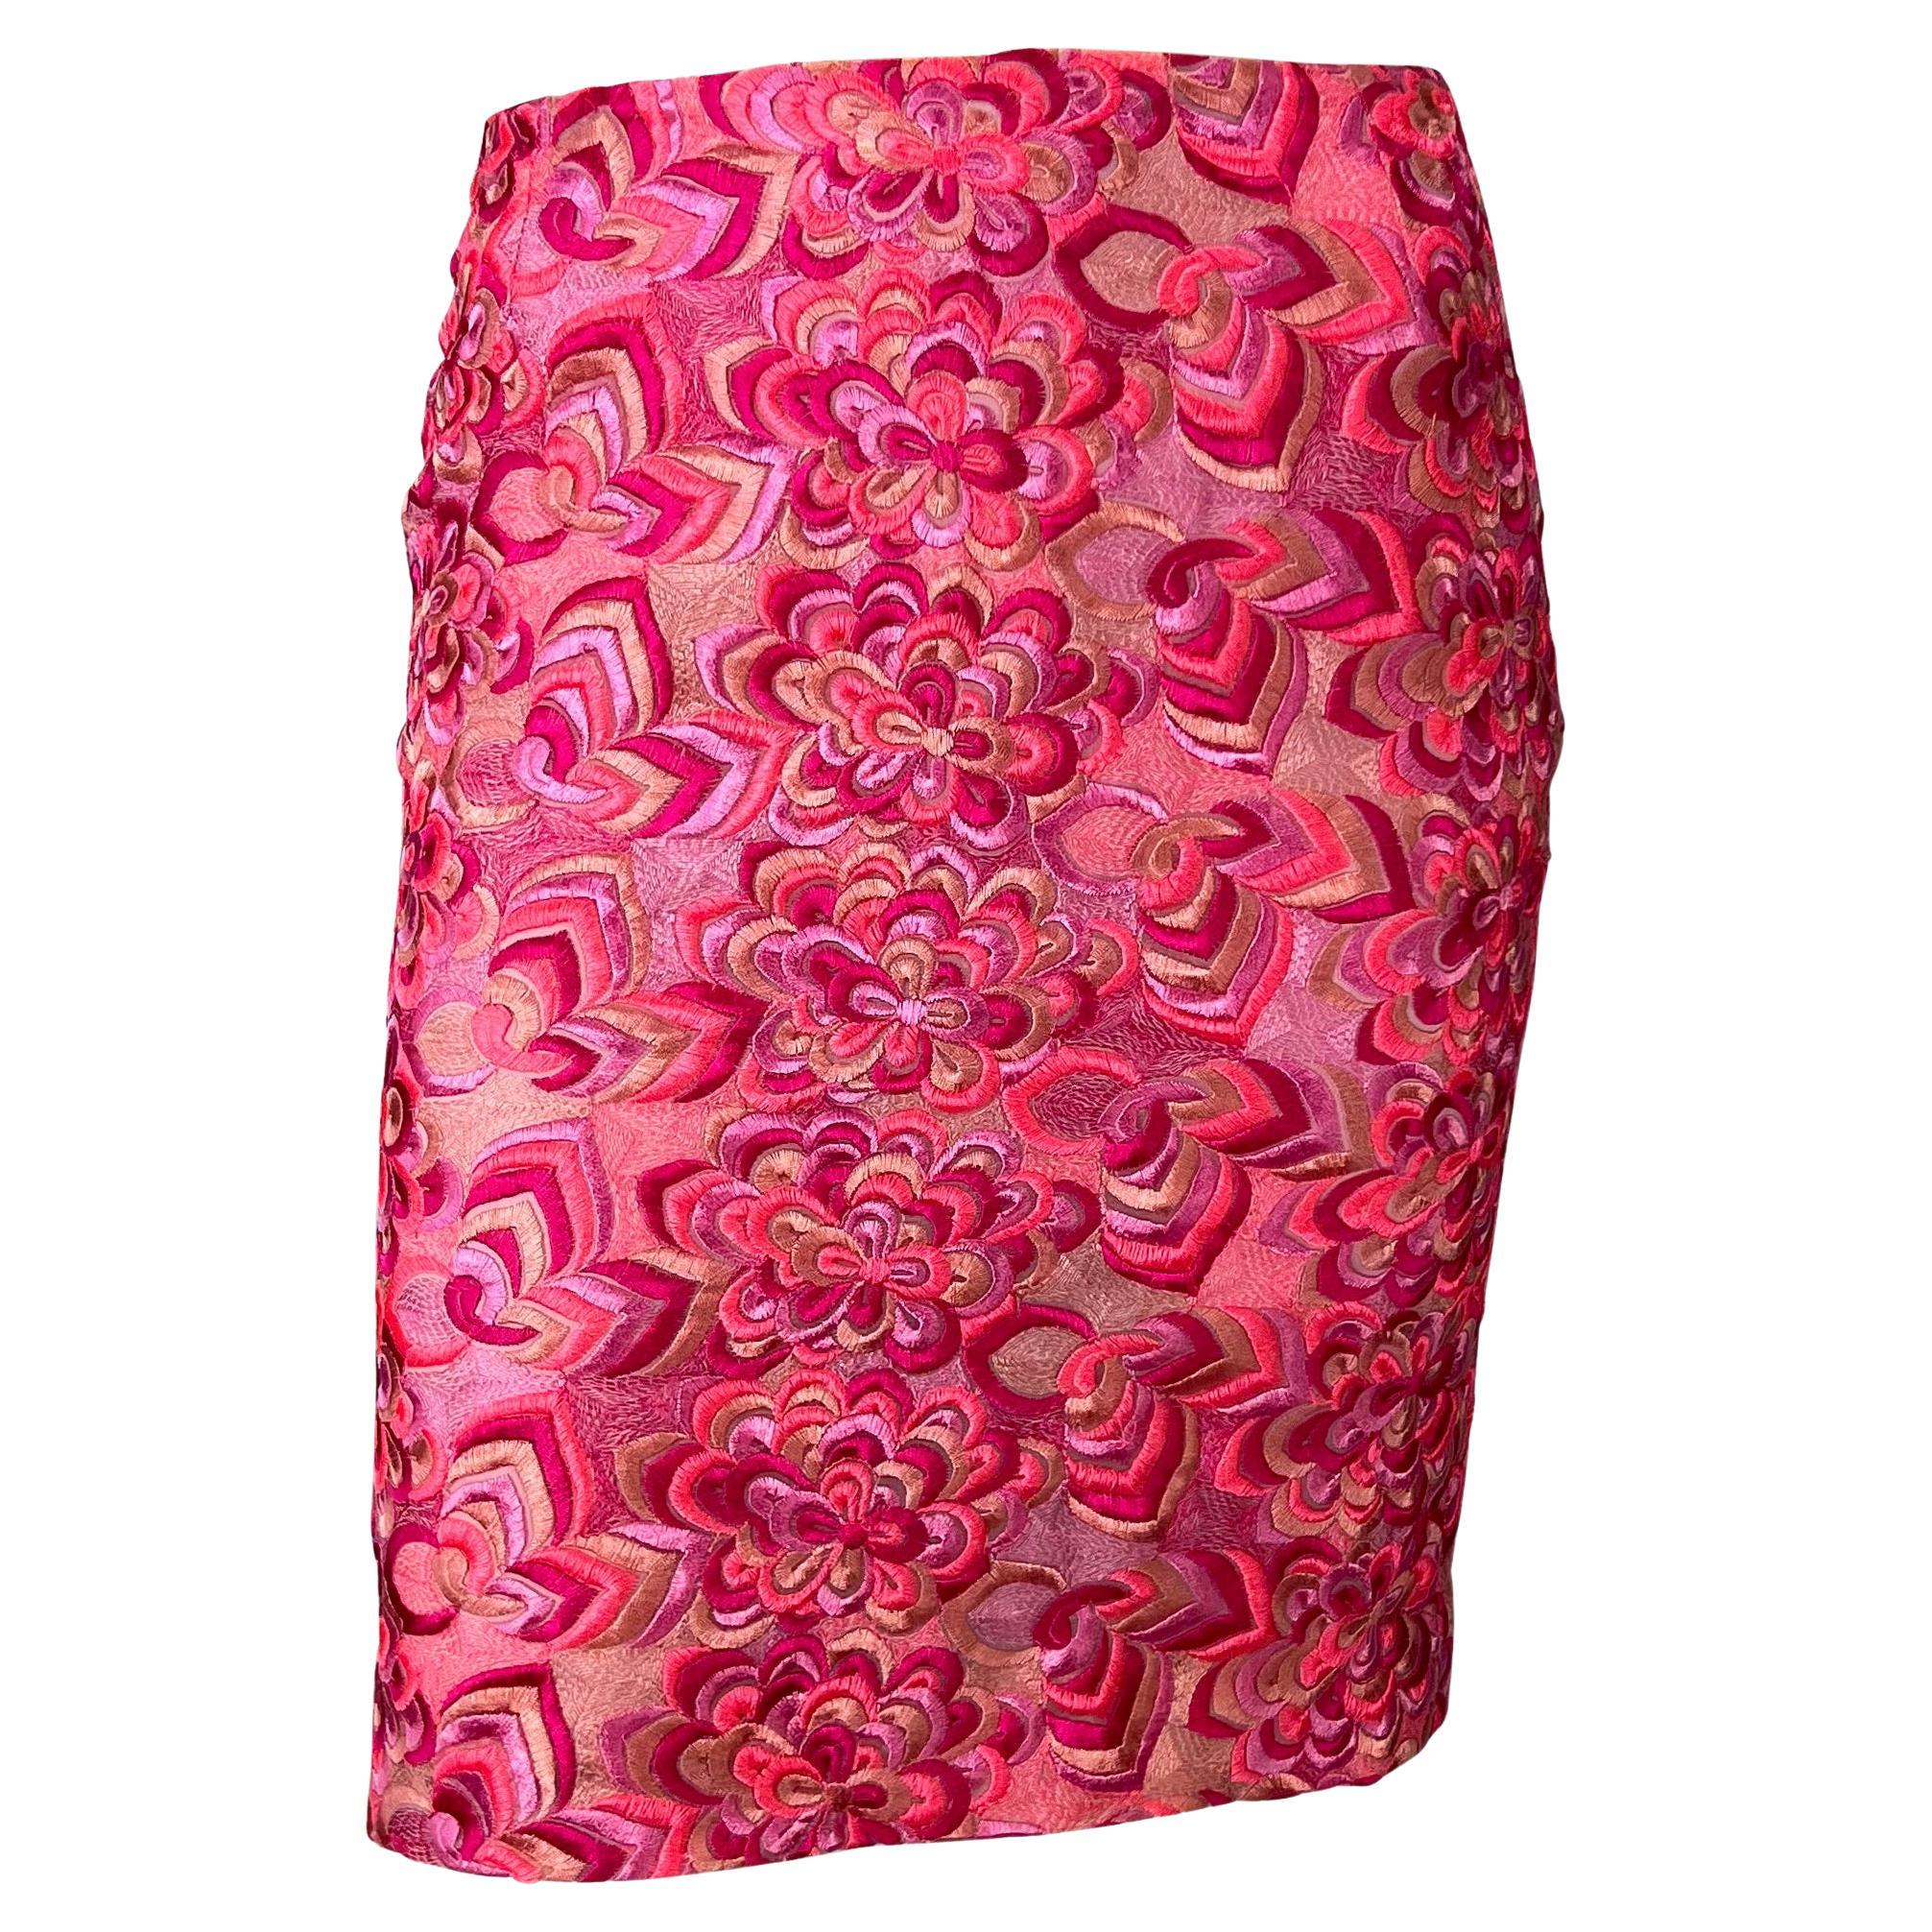 S/S 2000 Gianni Versace by Donatella Neon Pink Floral Embroidered Skirt